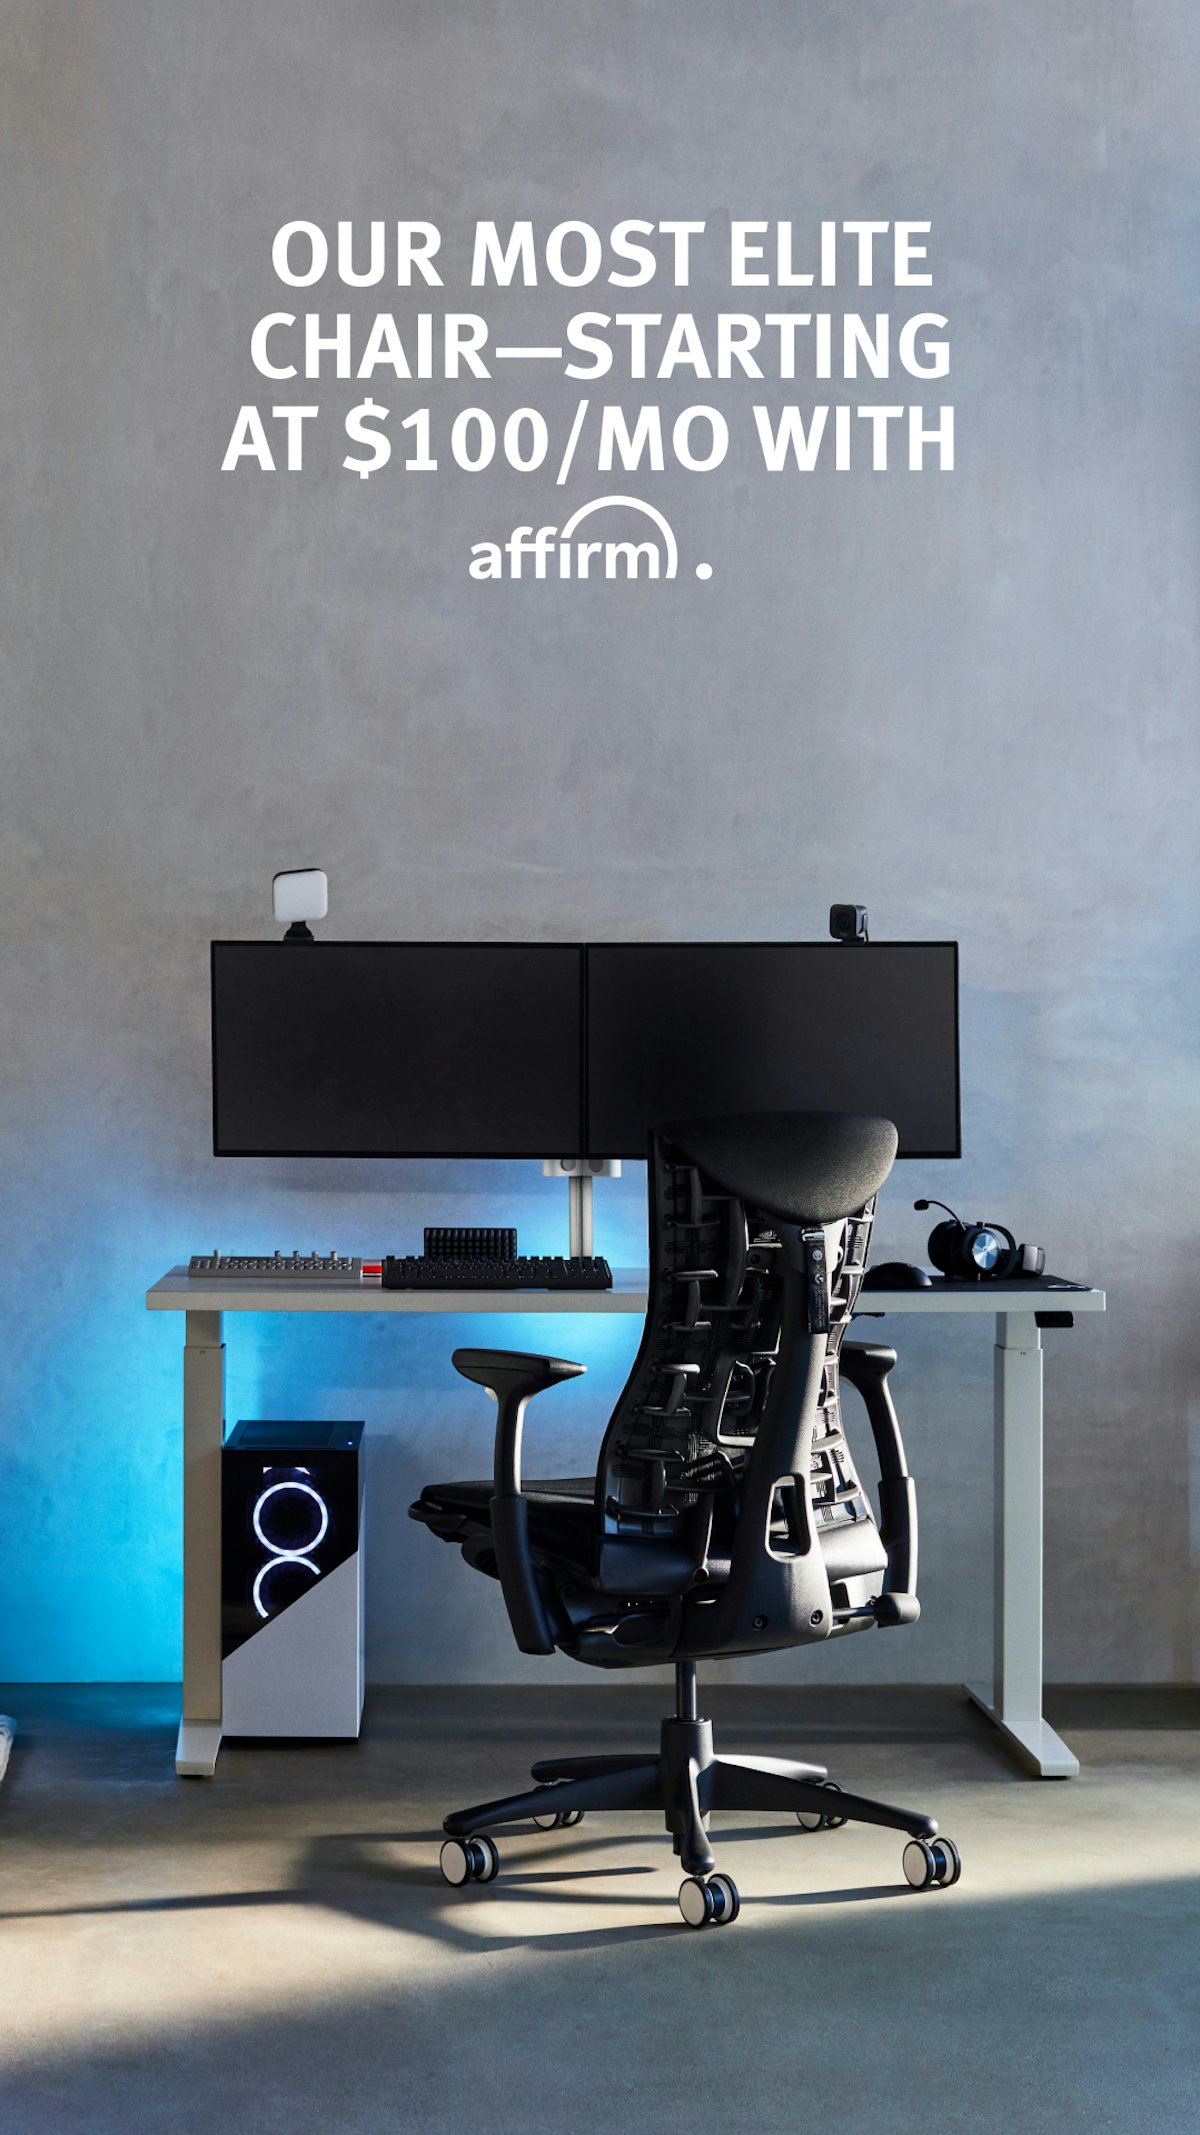 Affirm for Embody Gaming Chair